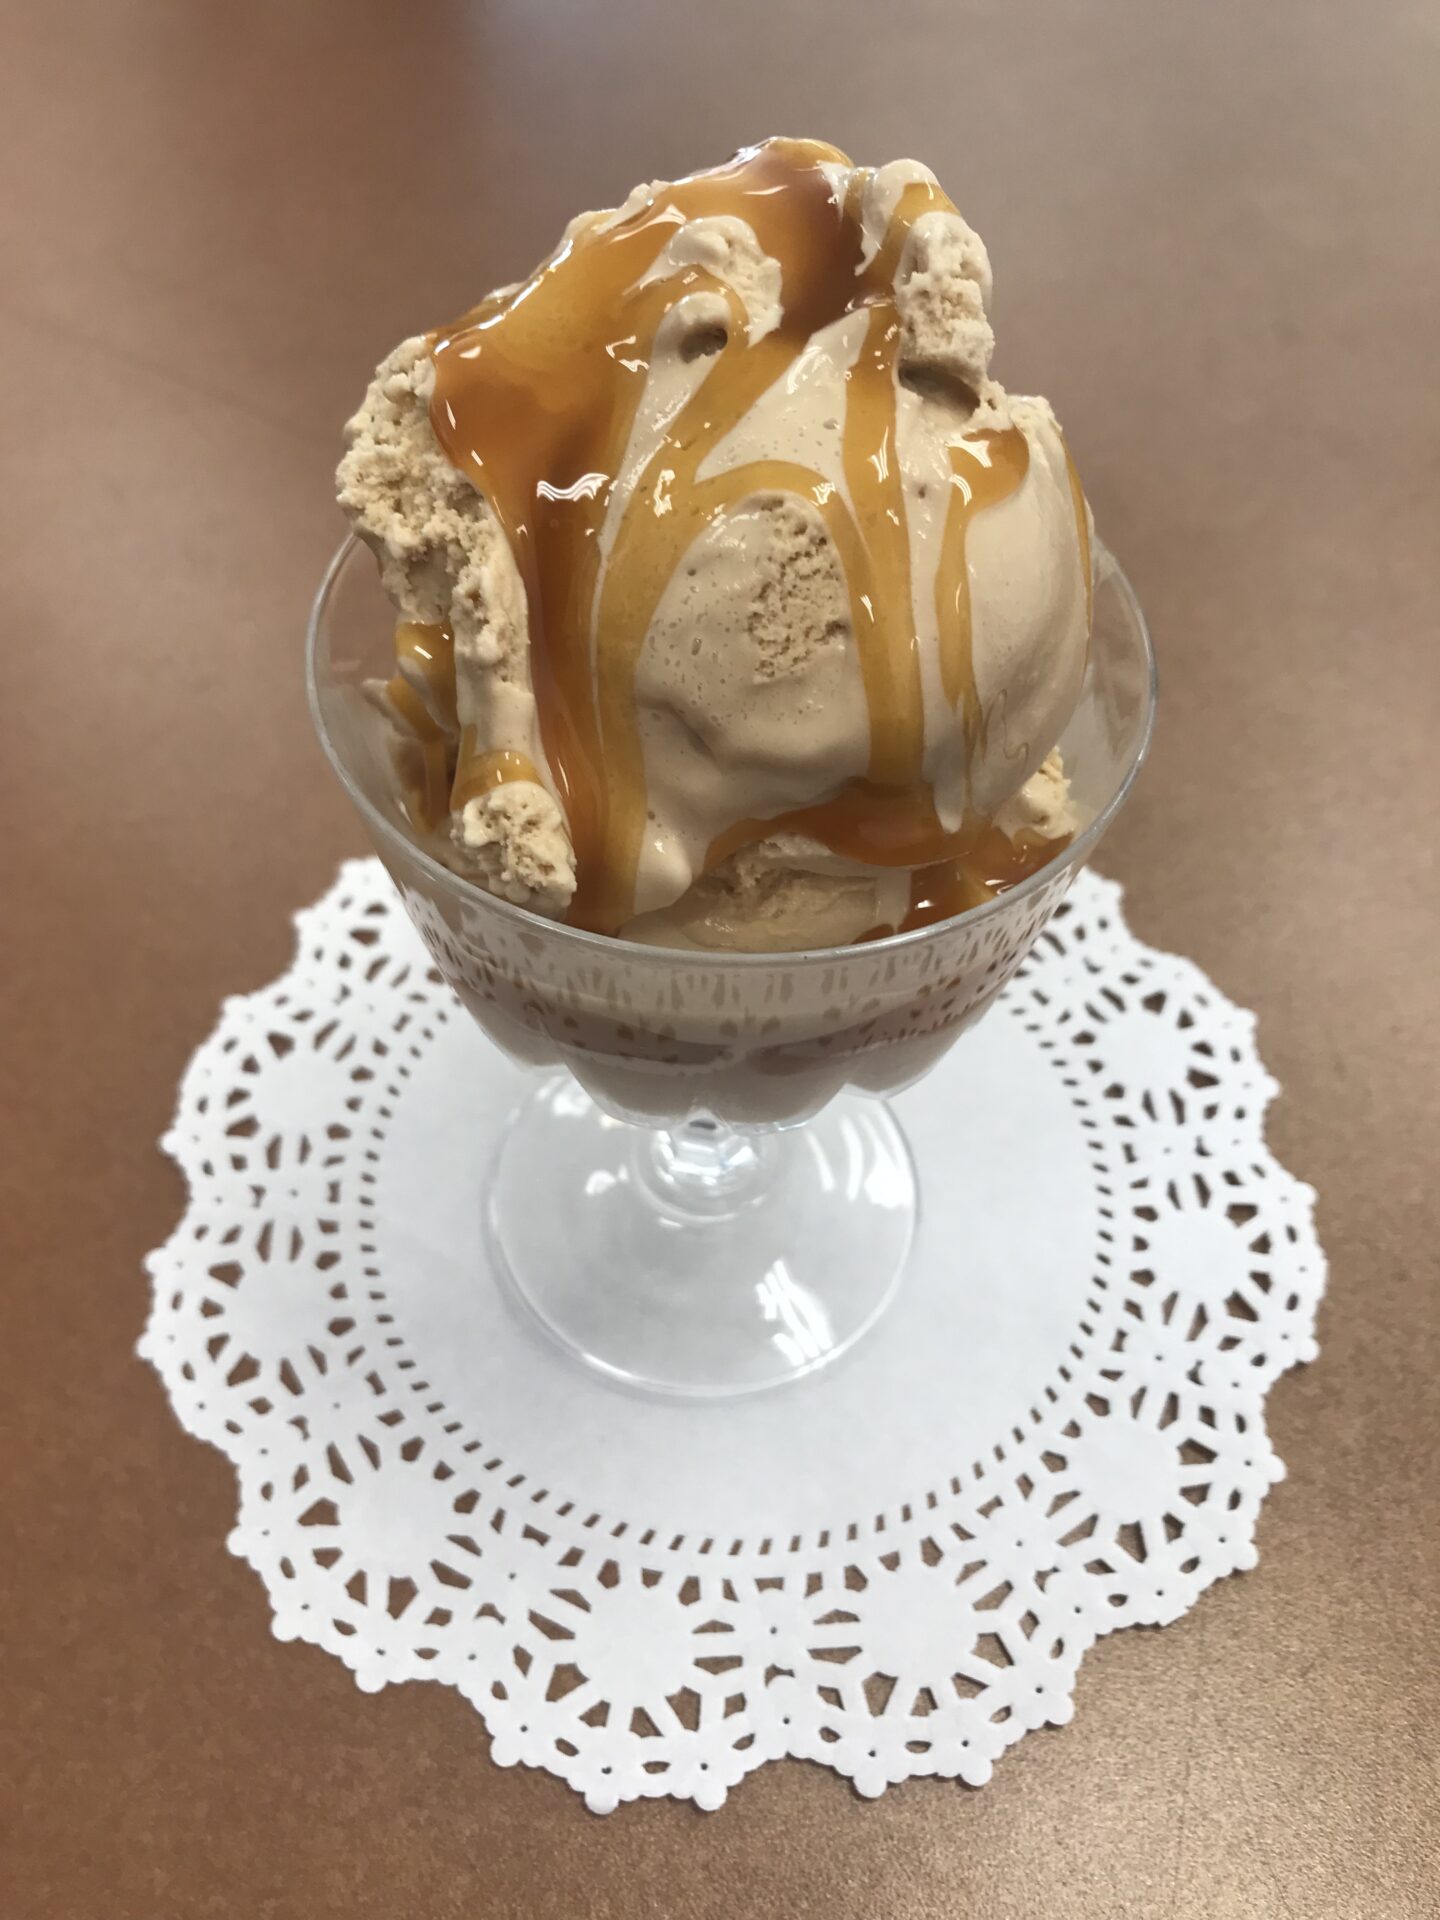 An ice cream drizzled with caramel syrup